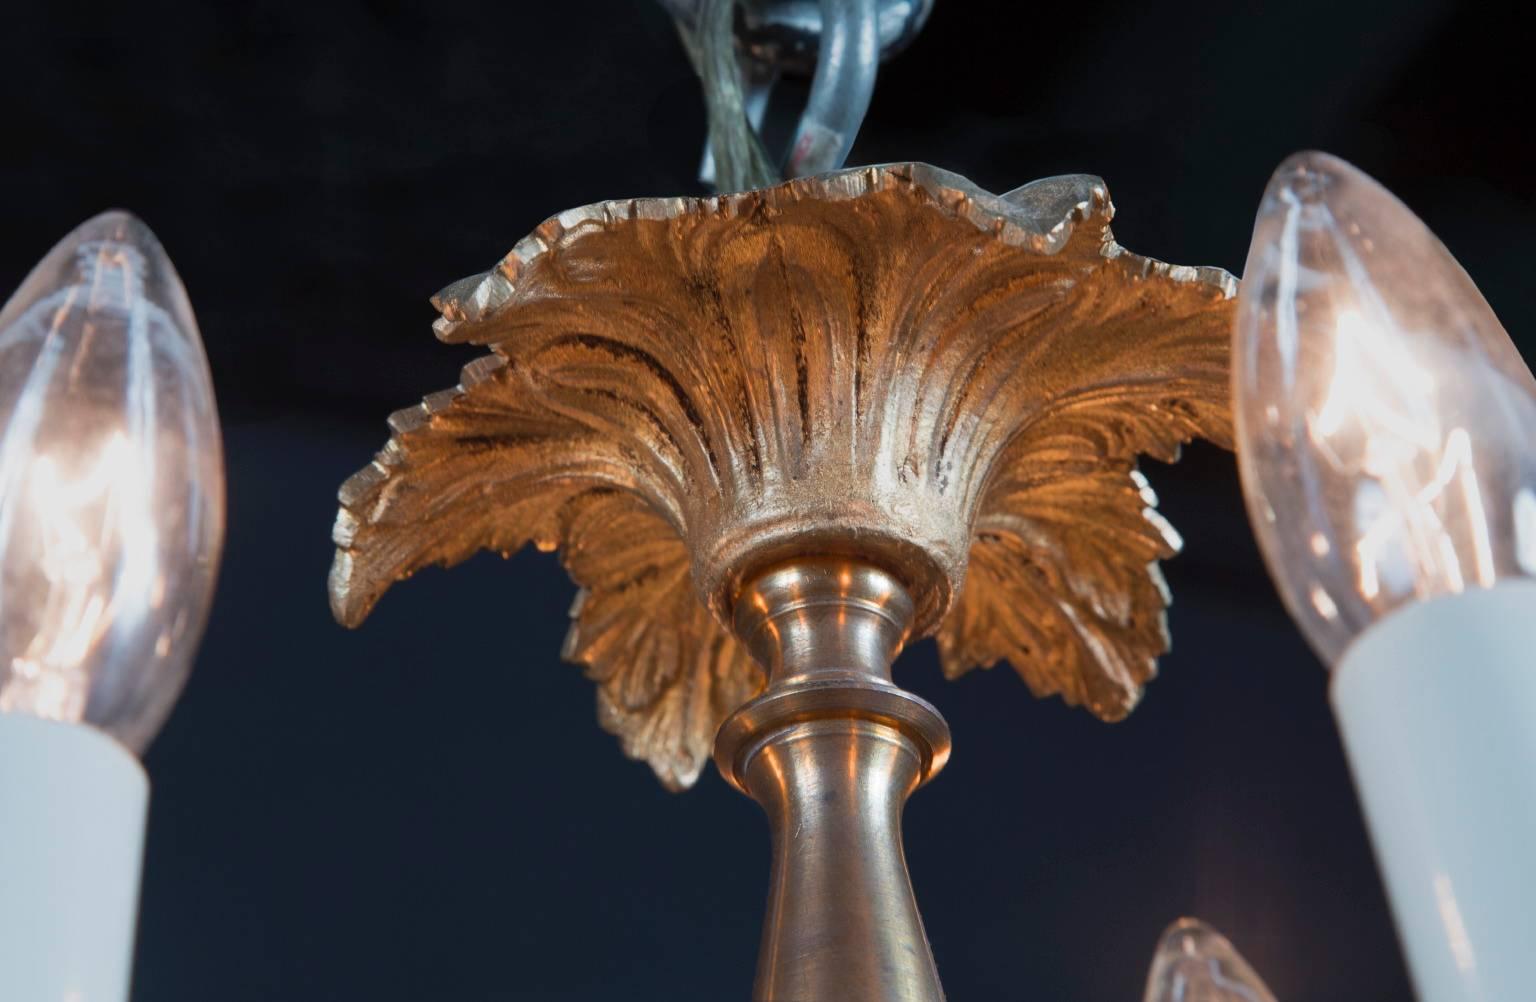 This Louis XVI bronze chandelier features bronze leaf  bobeches, a style mirrored in the crown of palm fronds at top. The 19th century French antique piece sports bronze scroll arms adorned with leaves, as well as a bronze center. The chandelier is